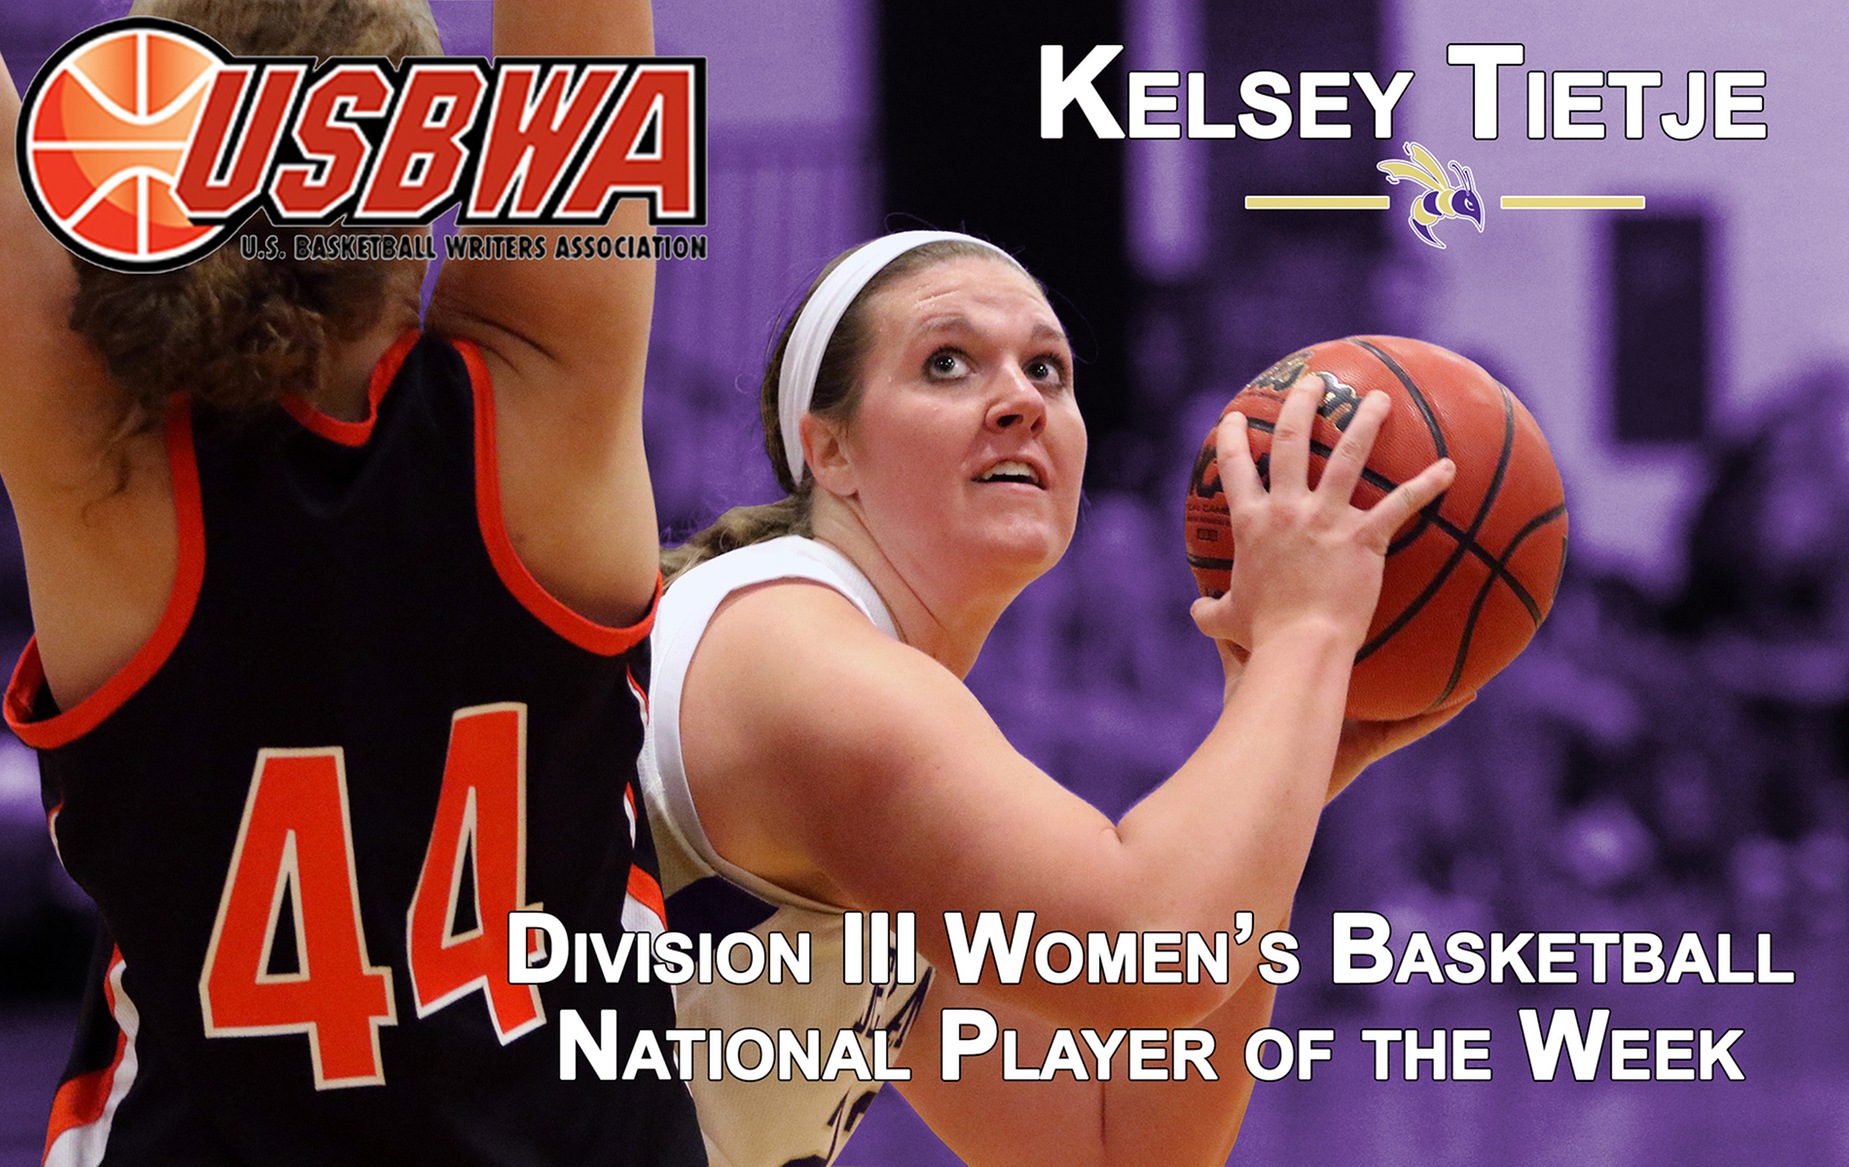 Tietje Adds Another Player of the Week Honor